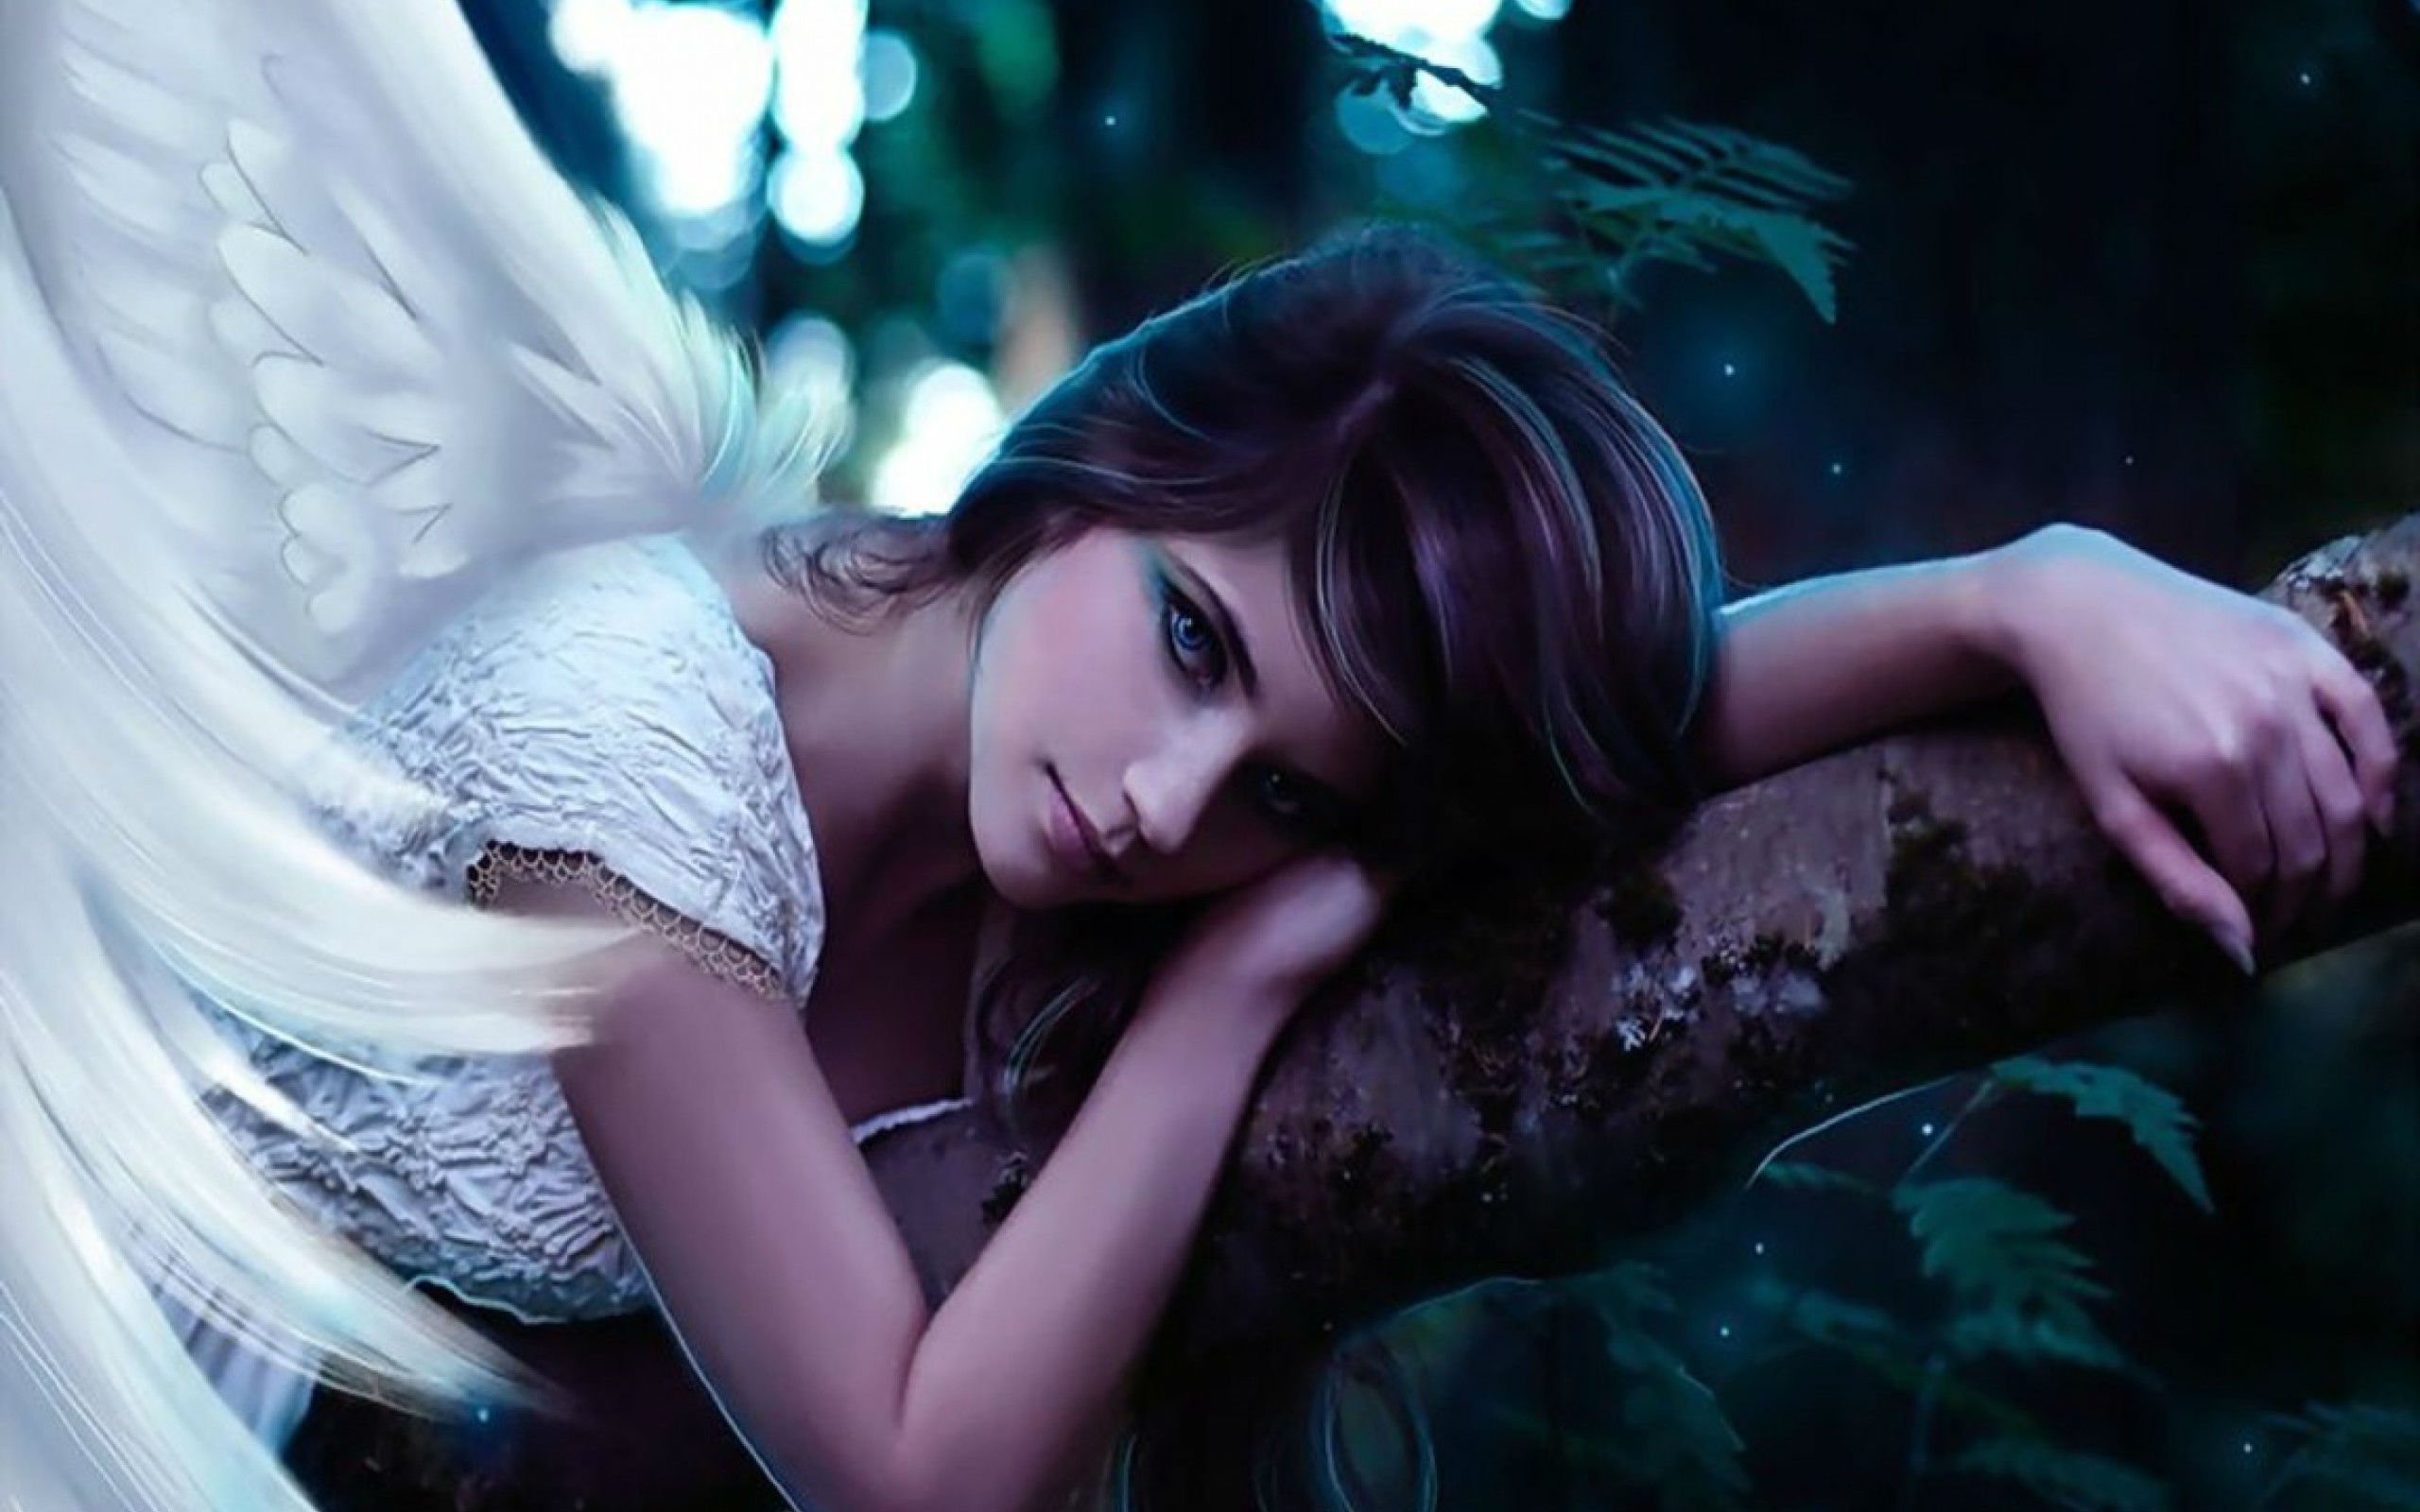 lonely, Mood, Sad, Alone, Sadness, Emotion, People, Loneliness, Solitude, Angel Wallpaper